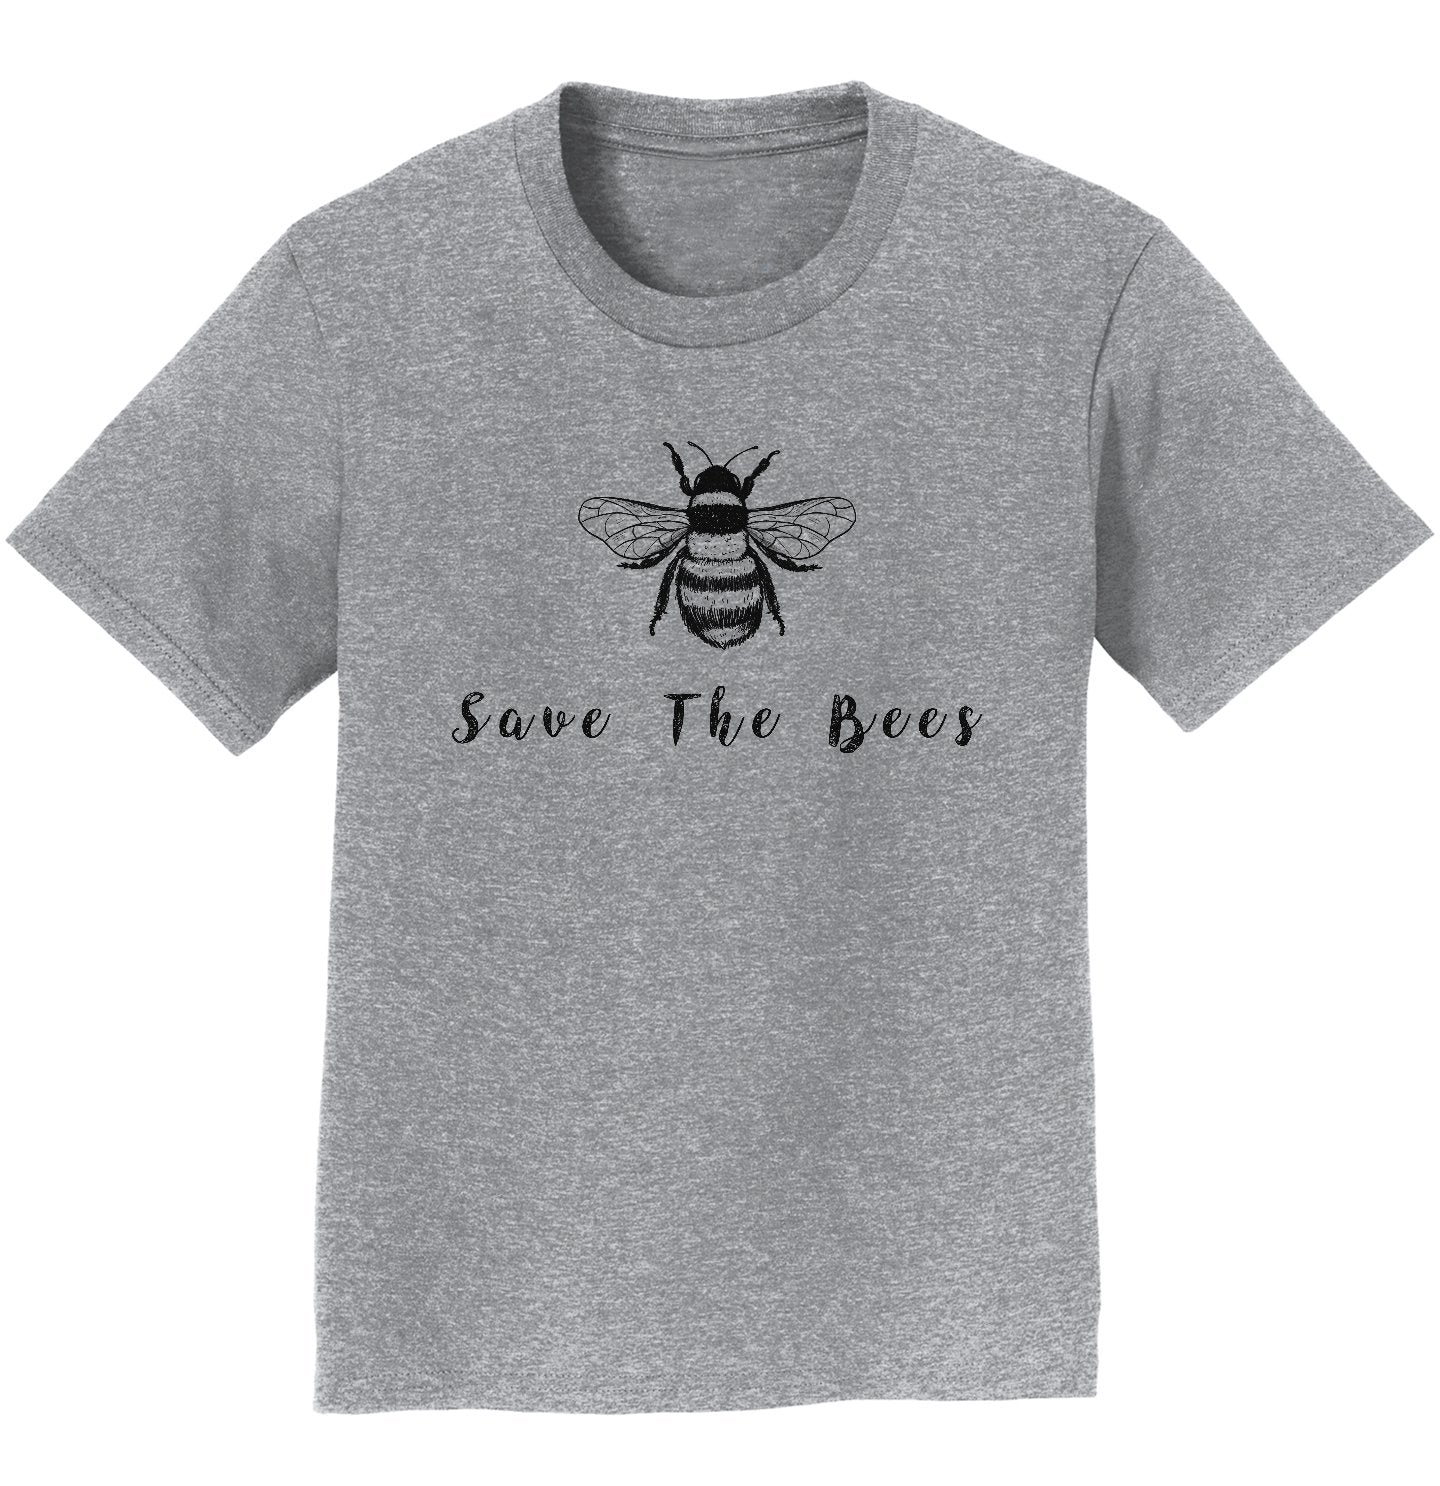 Save the Bees - Kids' Unisex T-Shirt